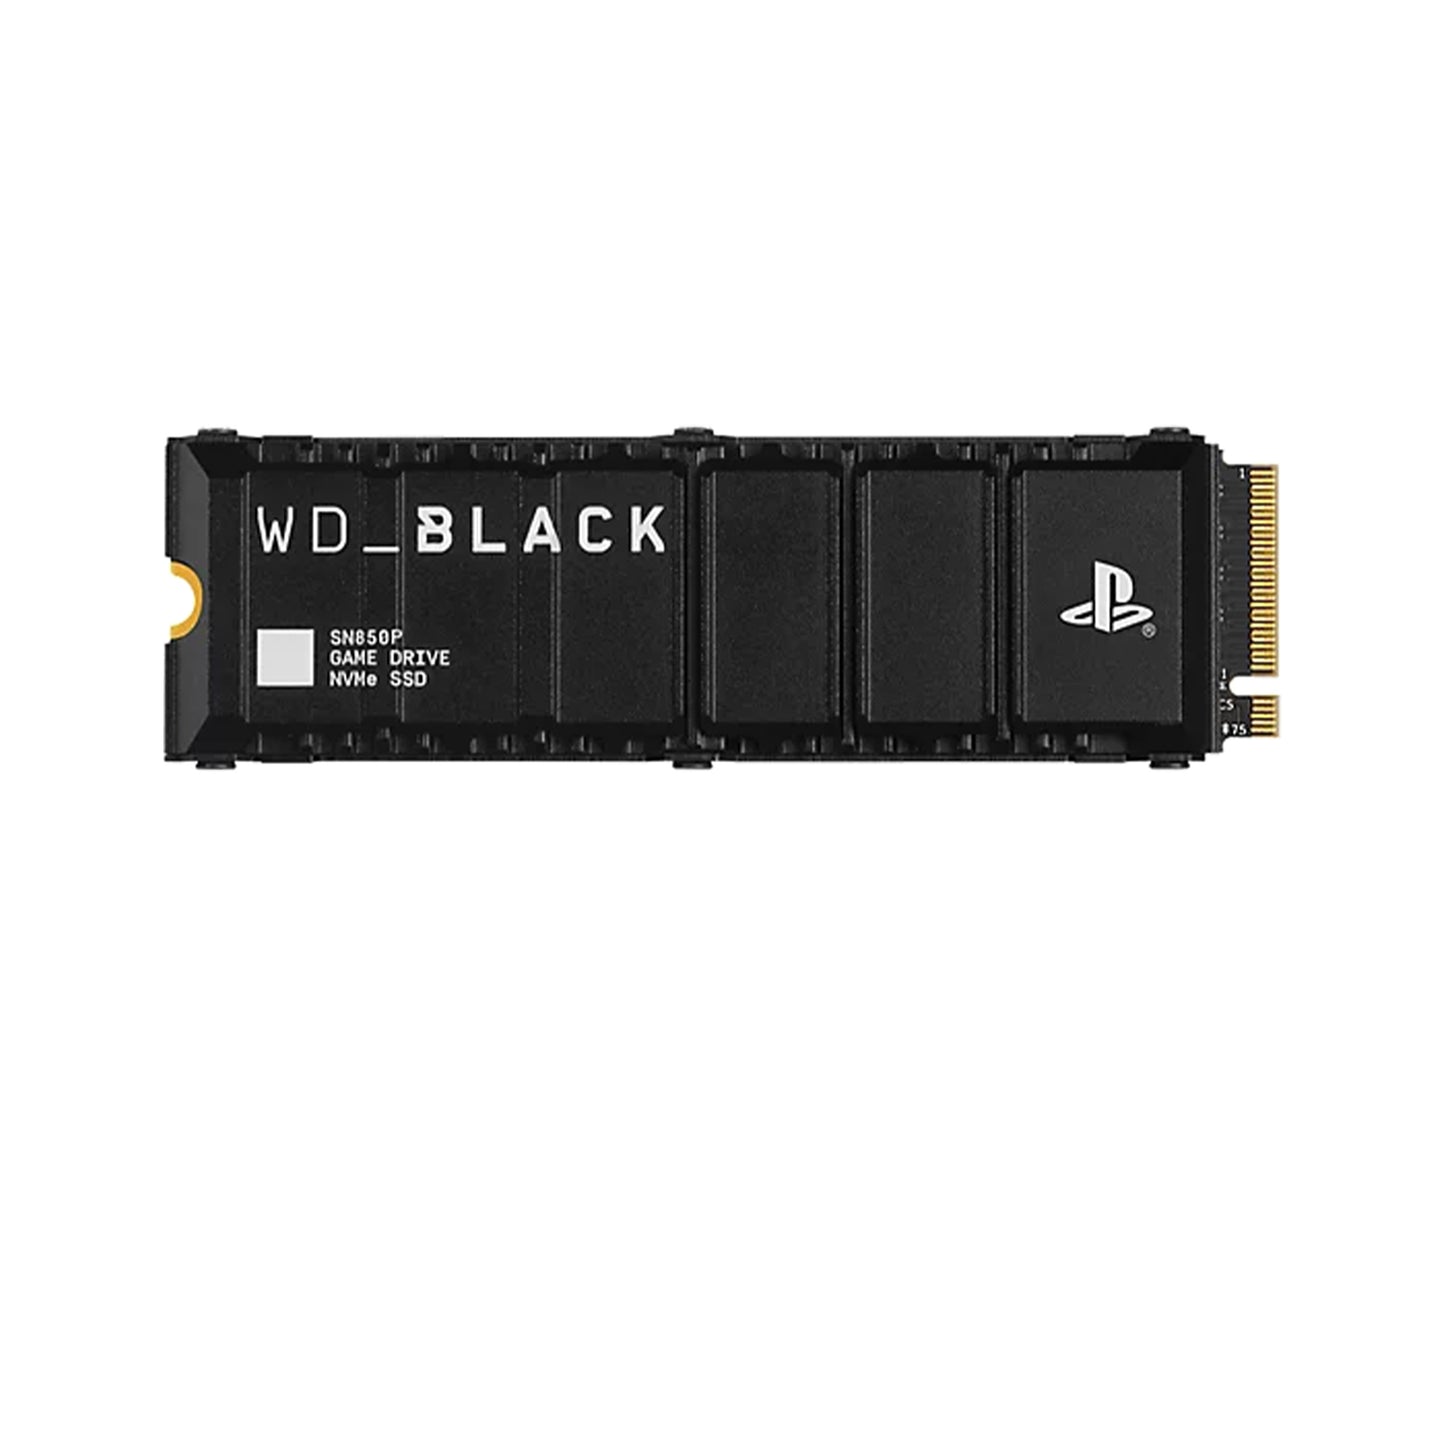 4TB WD BLACK™ SN850P NVMe™ SSD for PS5™ consoles